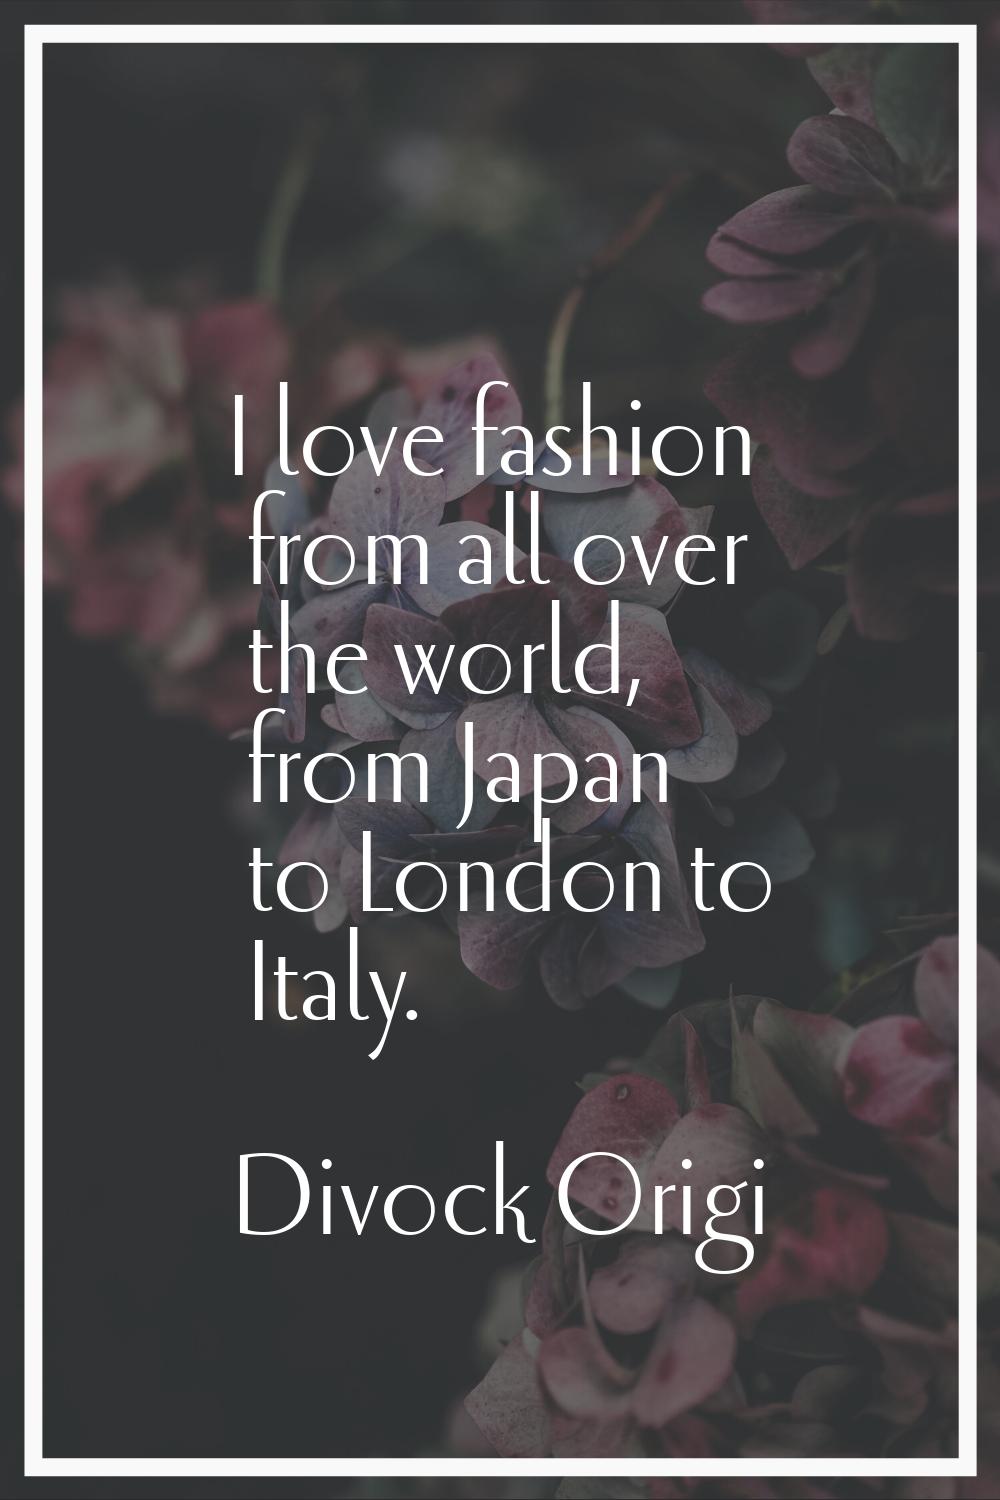 I love fashion from all over the world, from Japan to London to Italy.